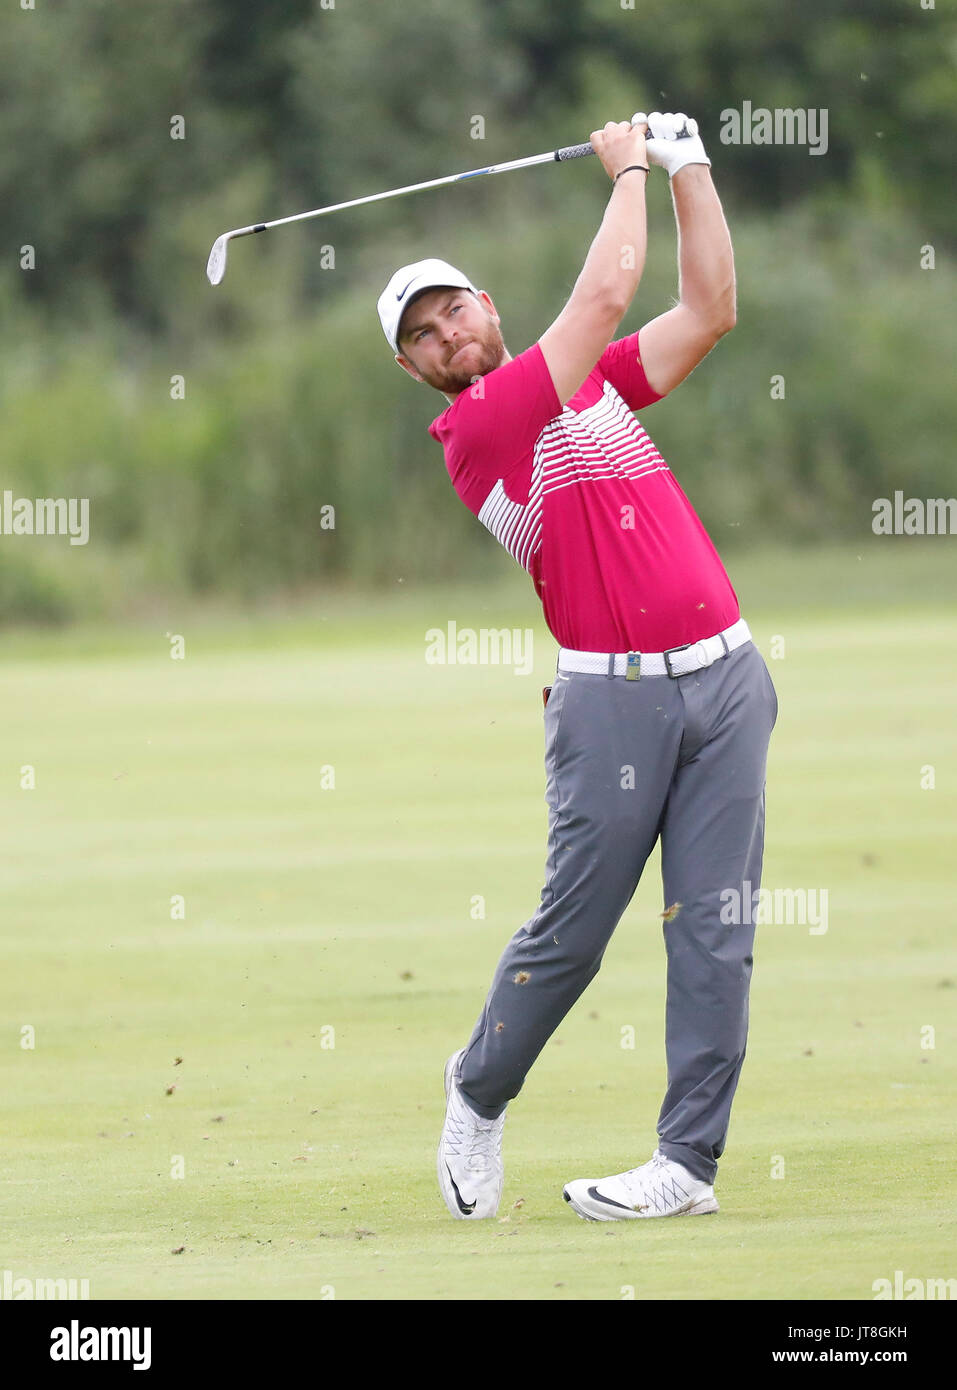 Jordan Smith of England in action during the 4th round of the men's Stock  Photo - Alamy